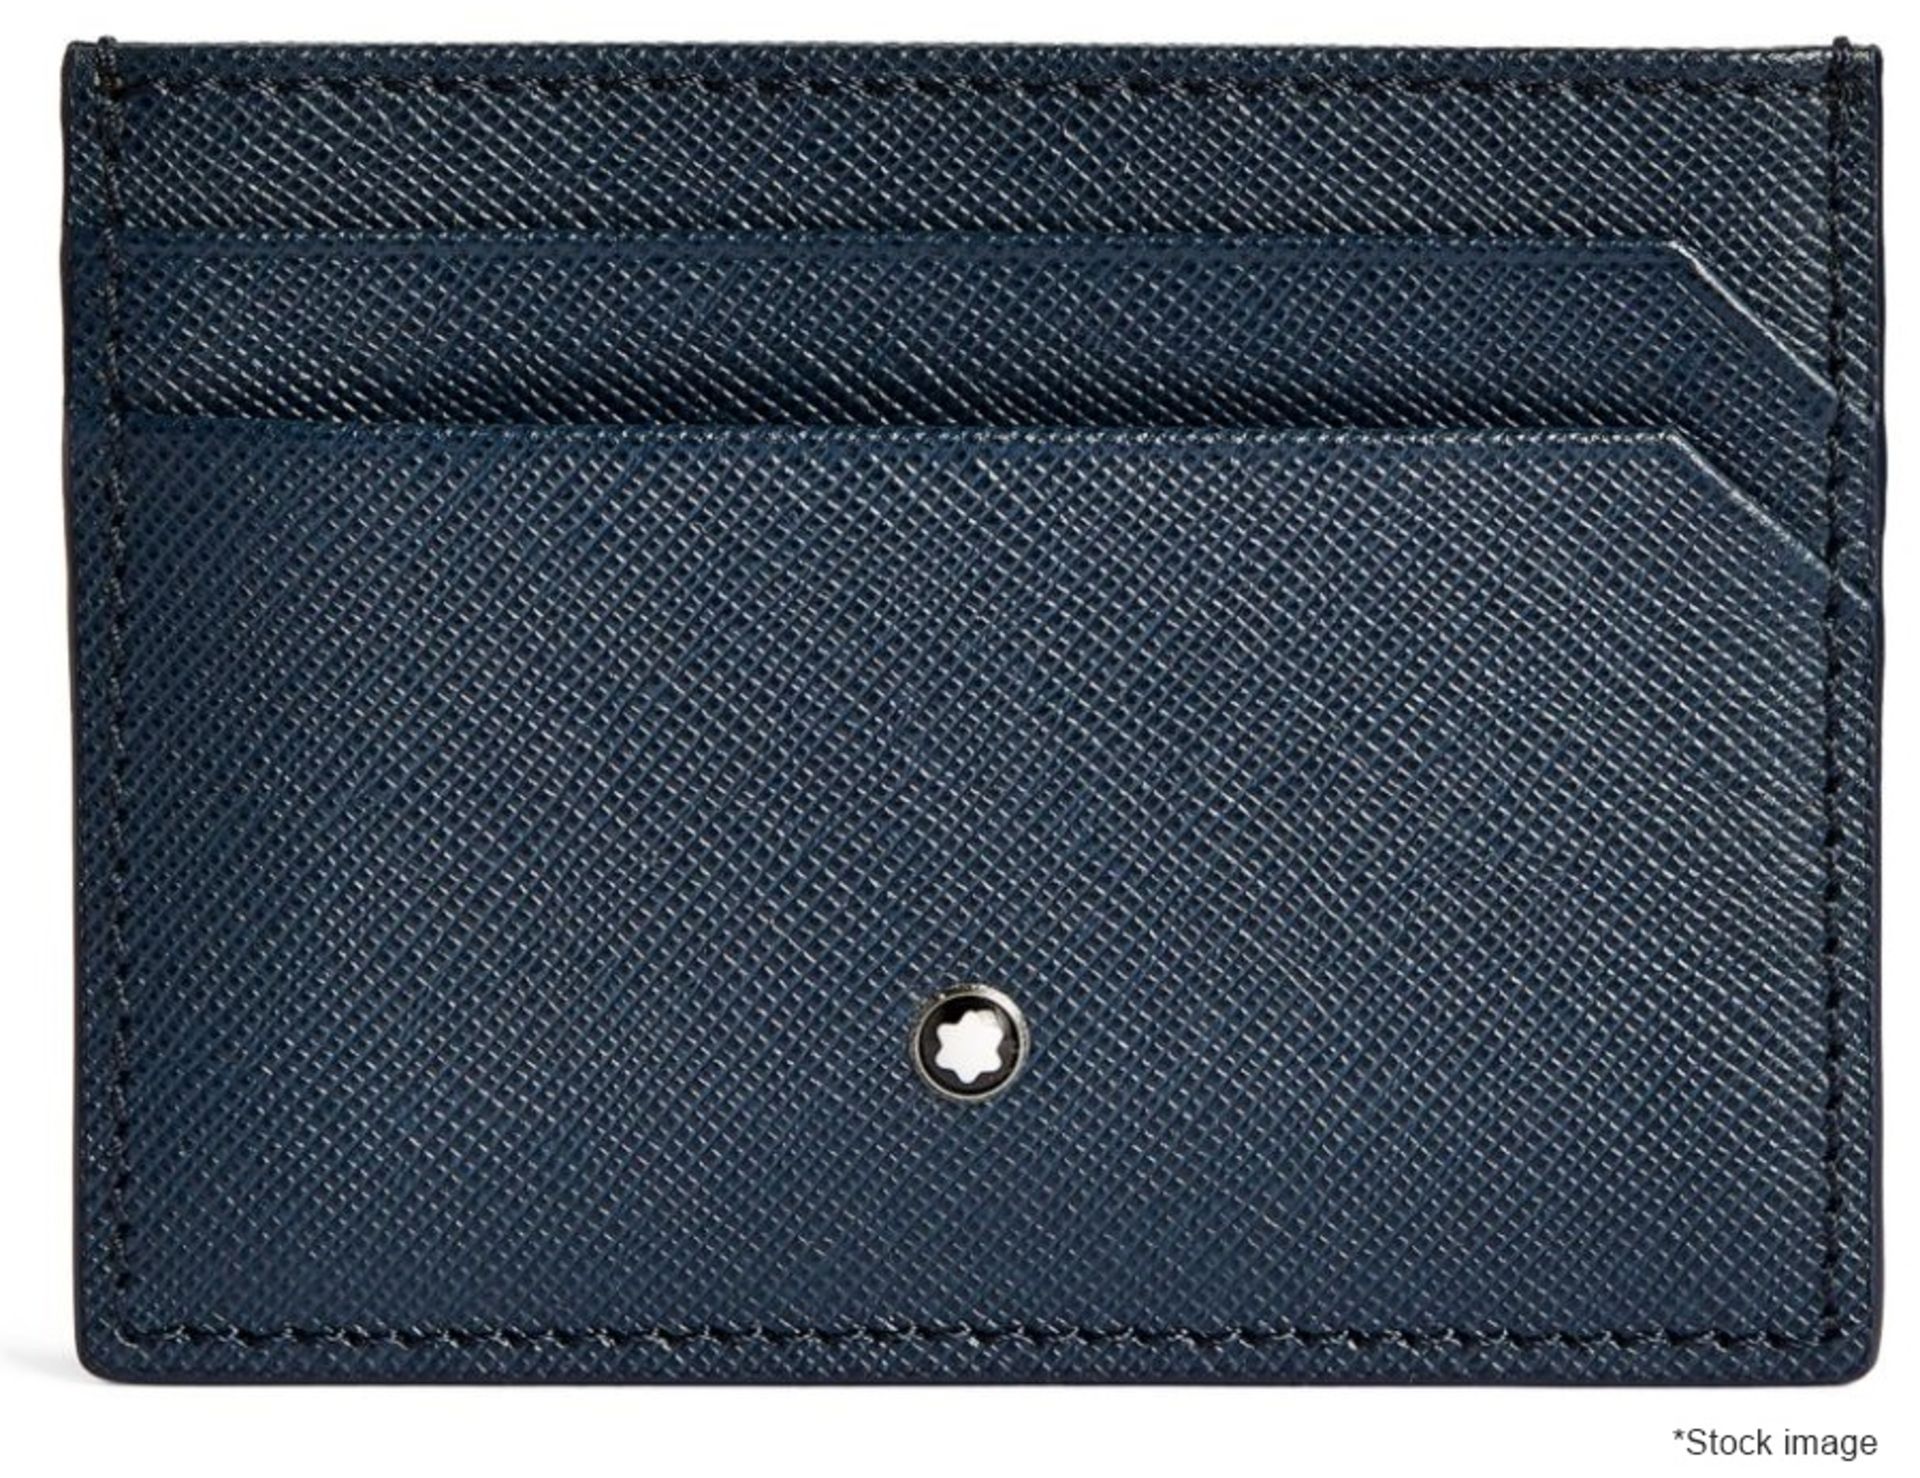 1 x MONTBLANC Sartorial Blue Luxury Leather Card Holder - Original Price £160.00 - Boxed Stock